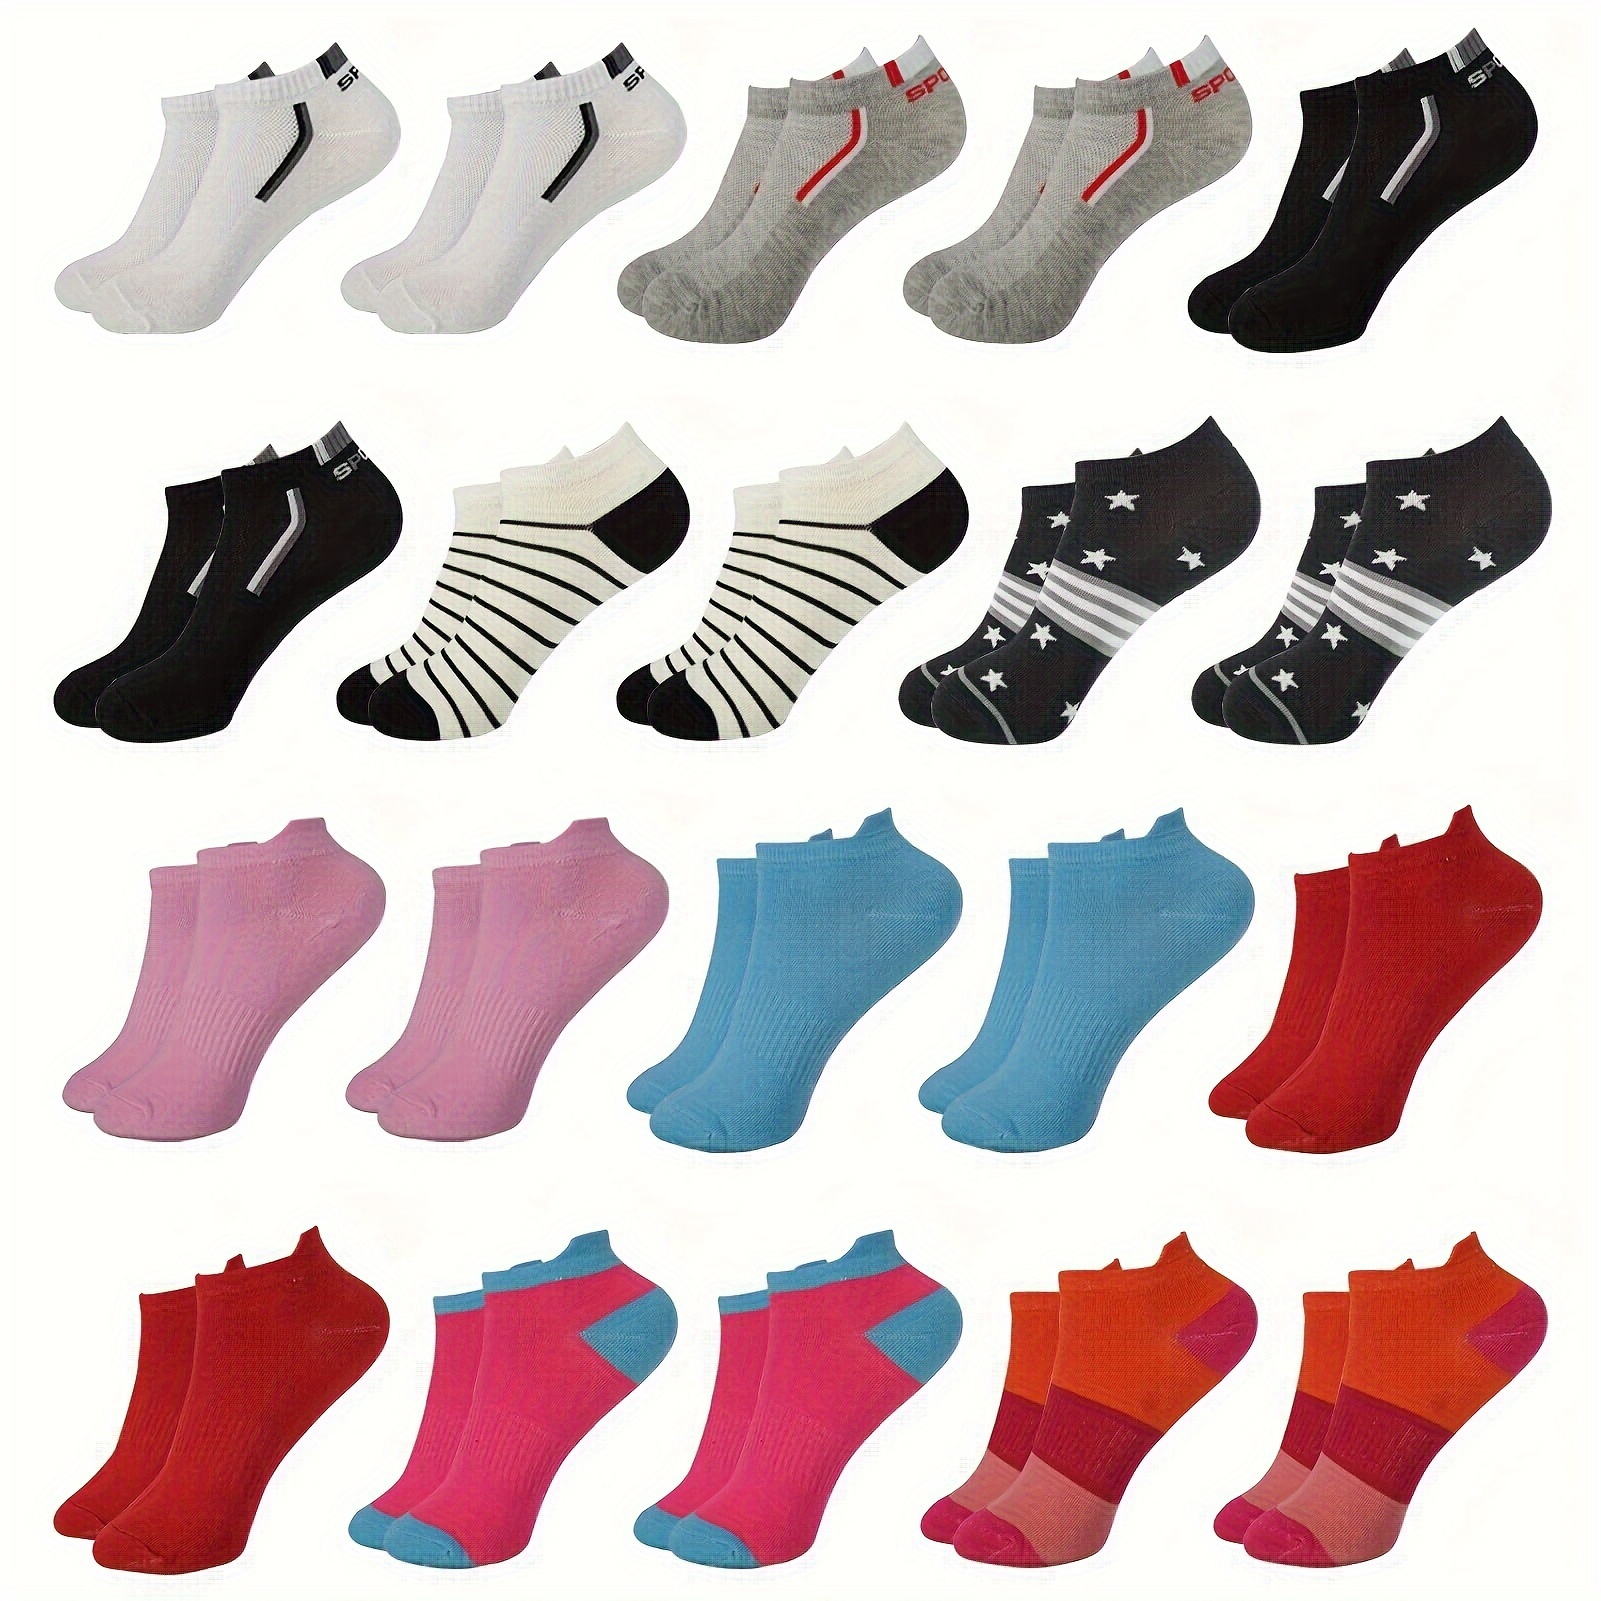 

20 Pairs Women's Ankle Socks, Low Cut, No Show, Athletic, Colorful, Comfortable, Stretch, For Running, Workout & Sports